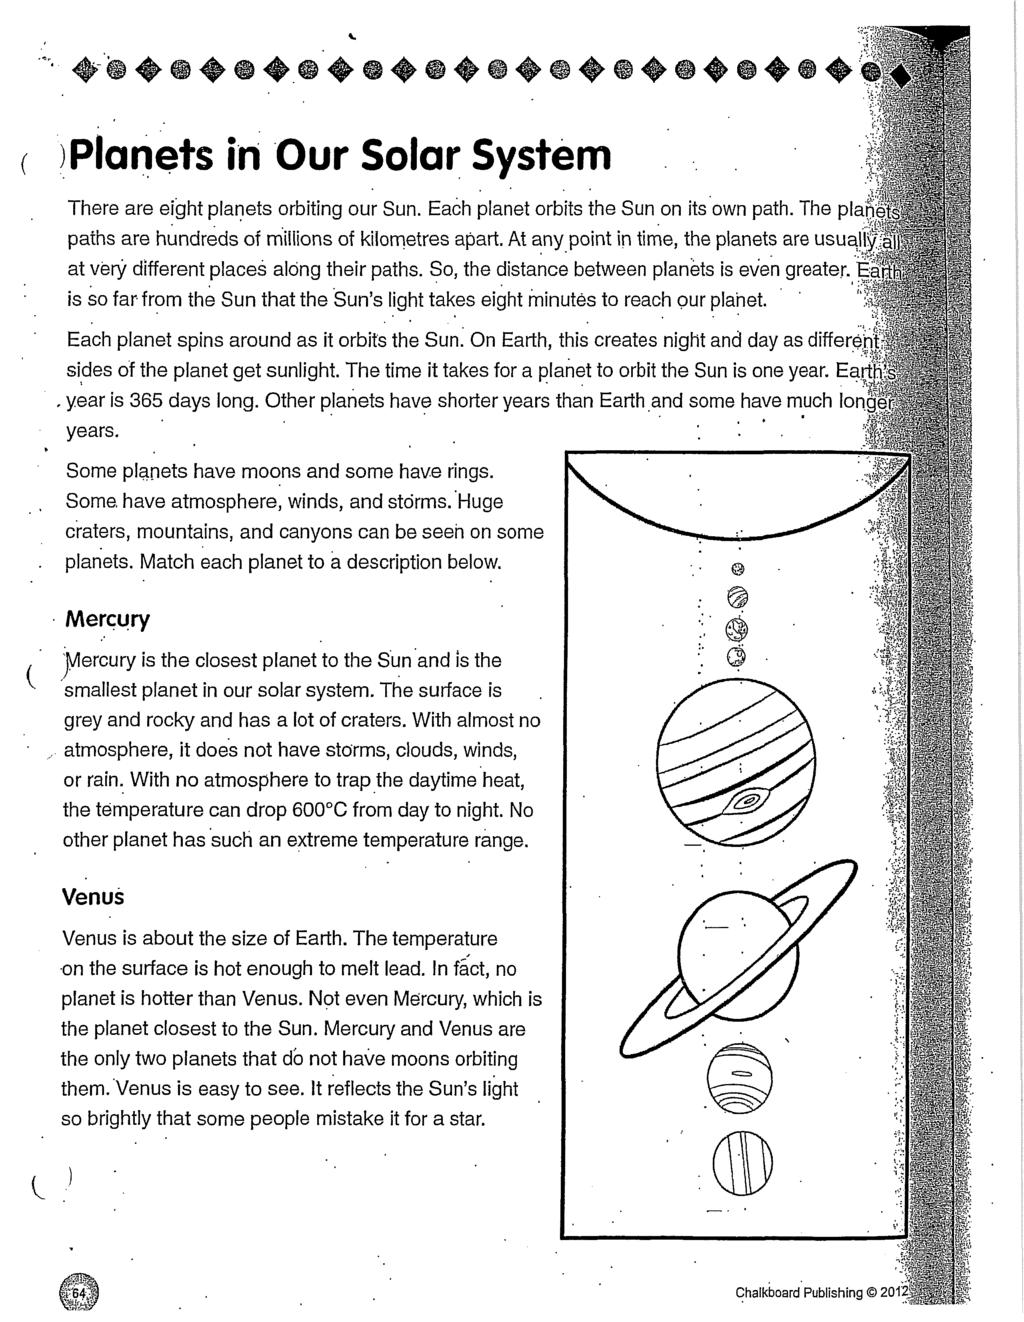 Planets in Our Solar System There are eight planets orbiting our Sun. Each planet orbits the Sun on its own path. The planefss. pains are hundreds of millions of kilometres apart.